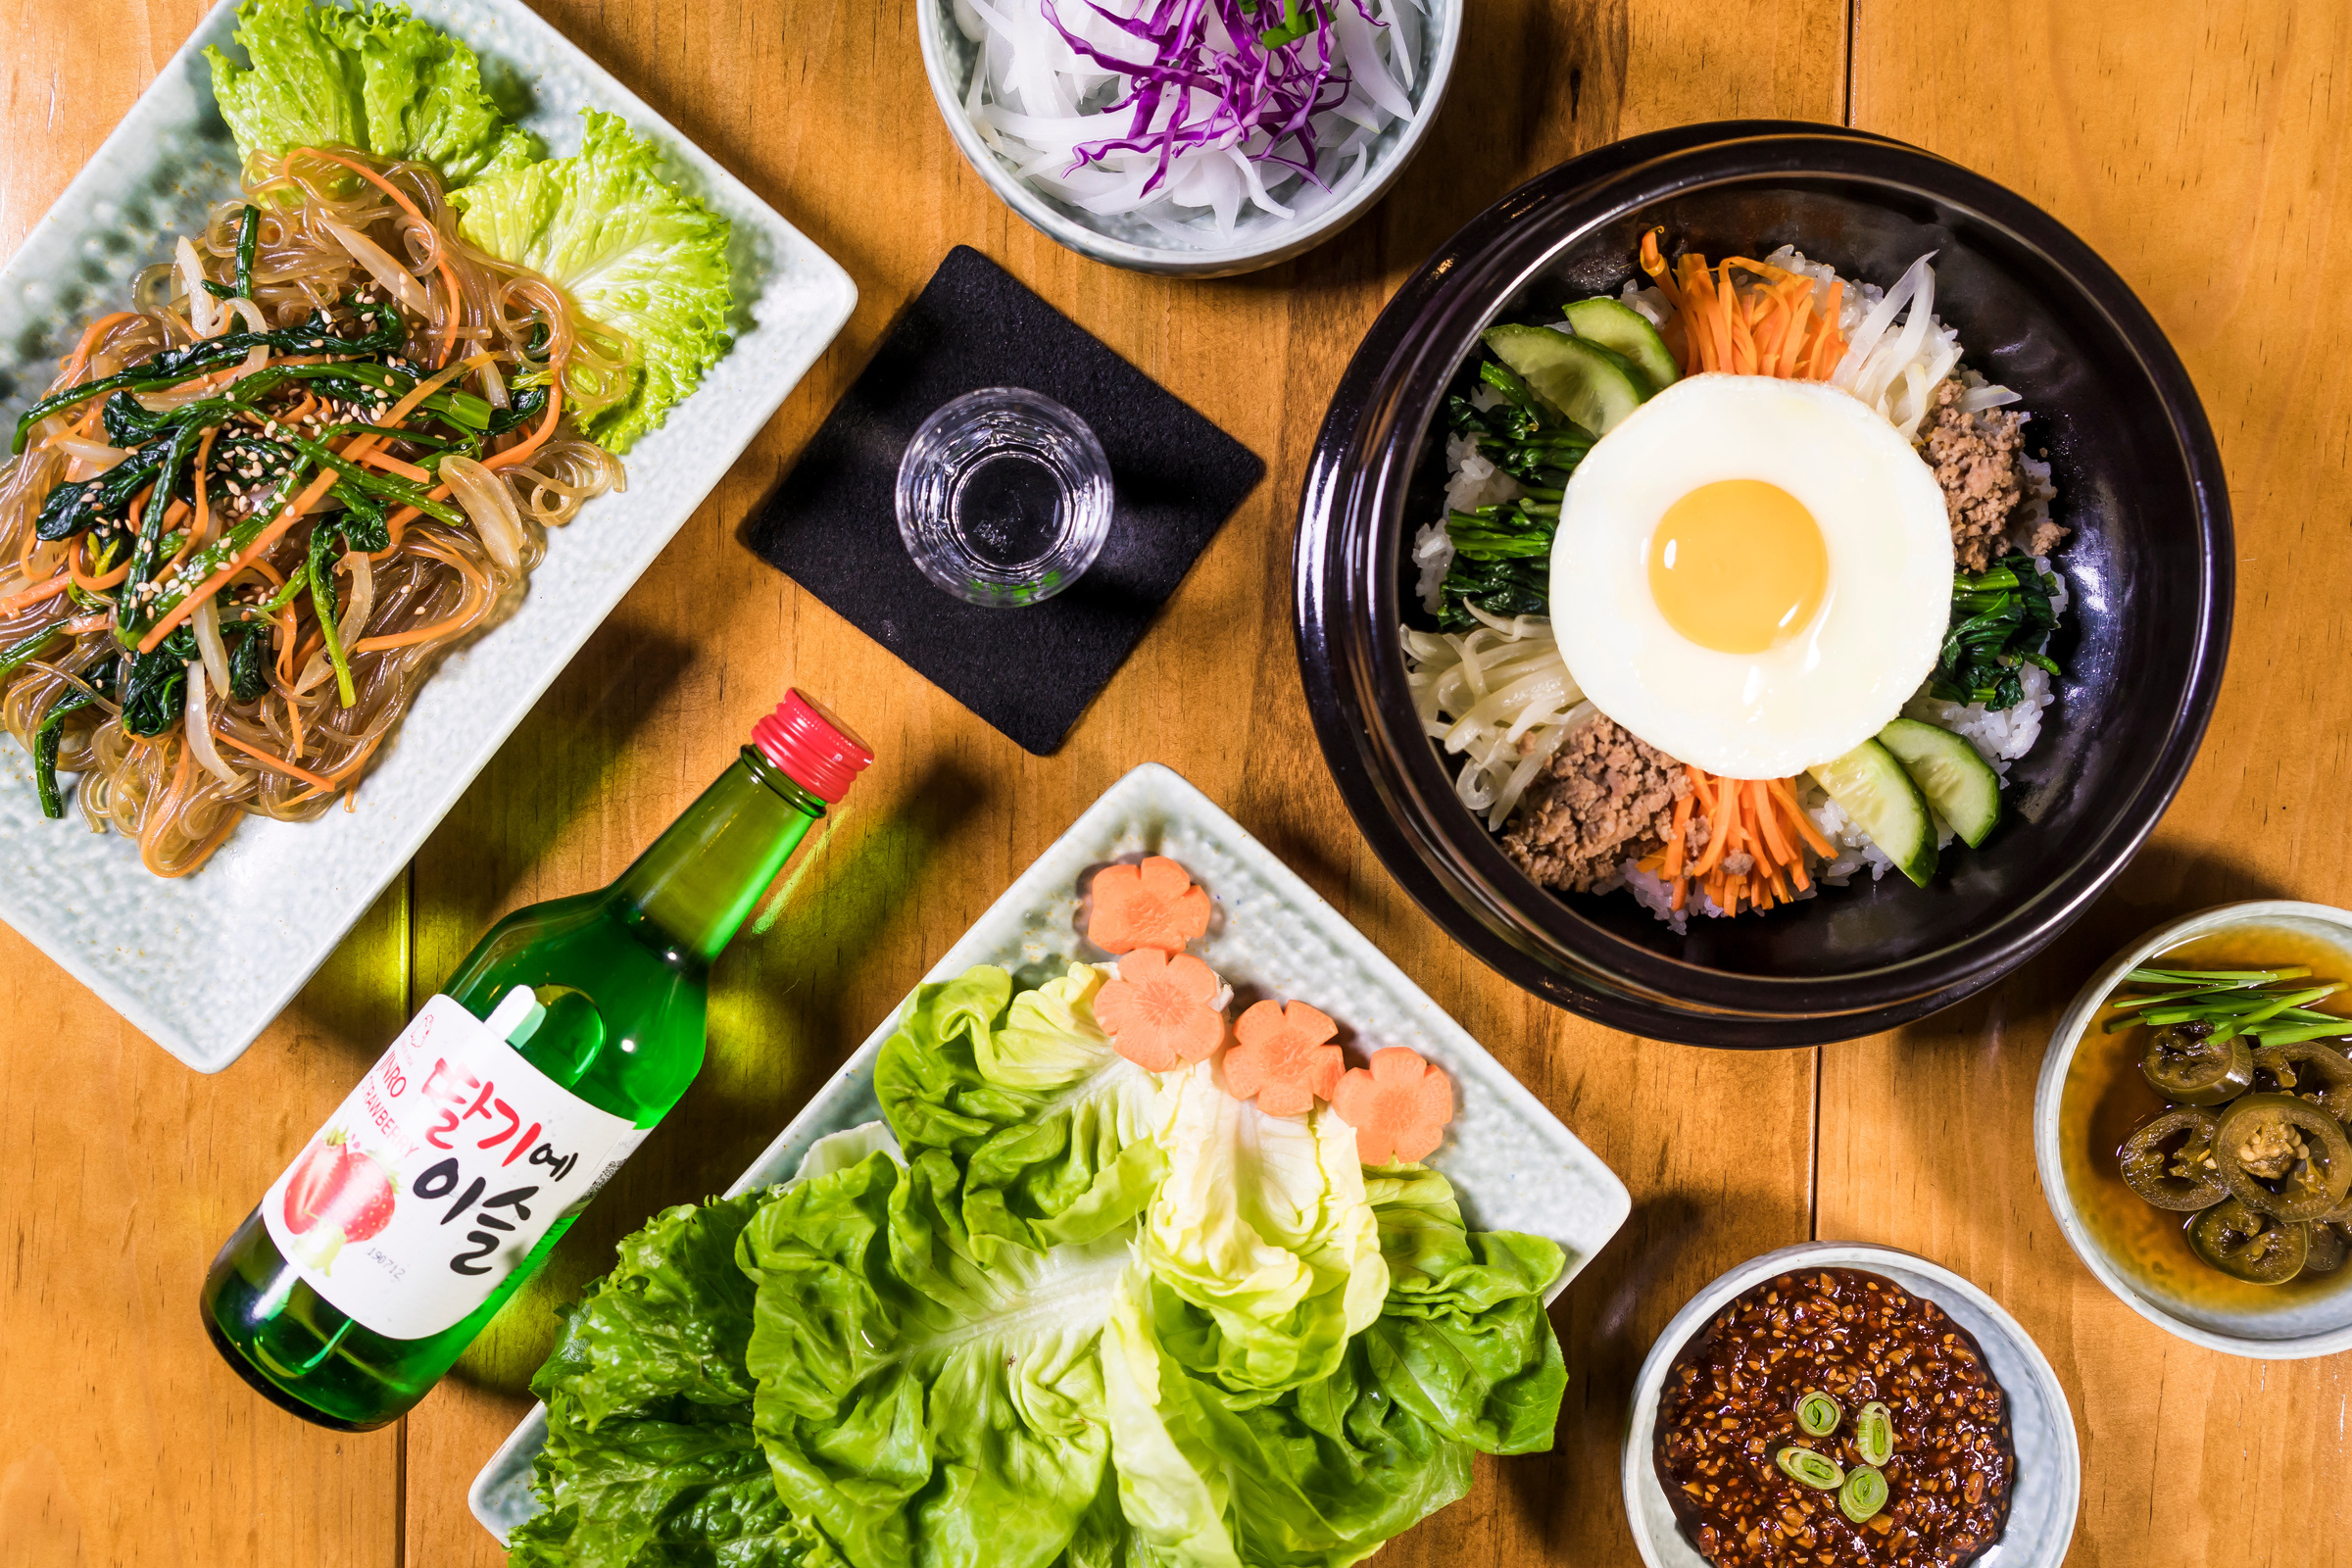 Top View of Soju and a Variety of Korean Food